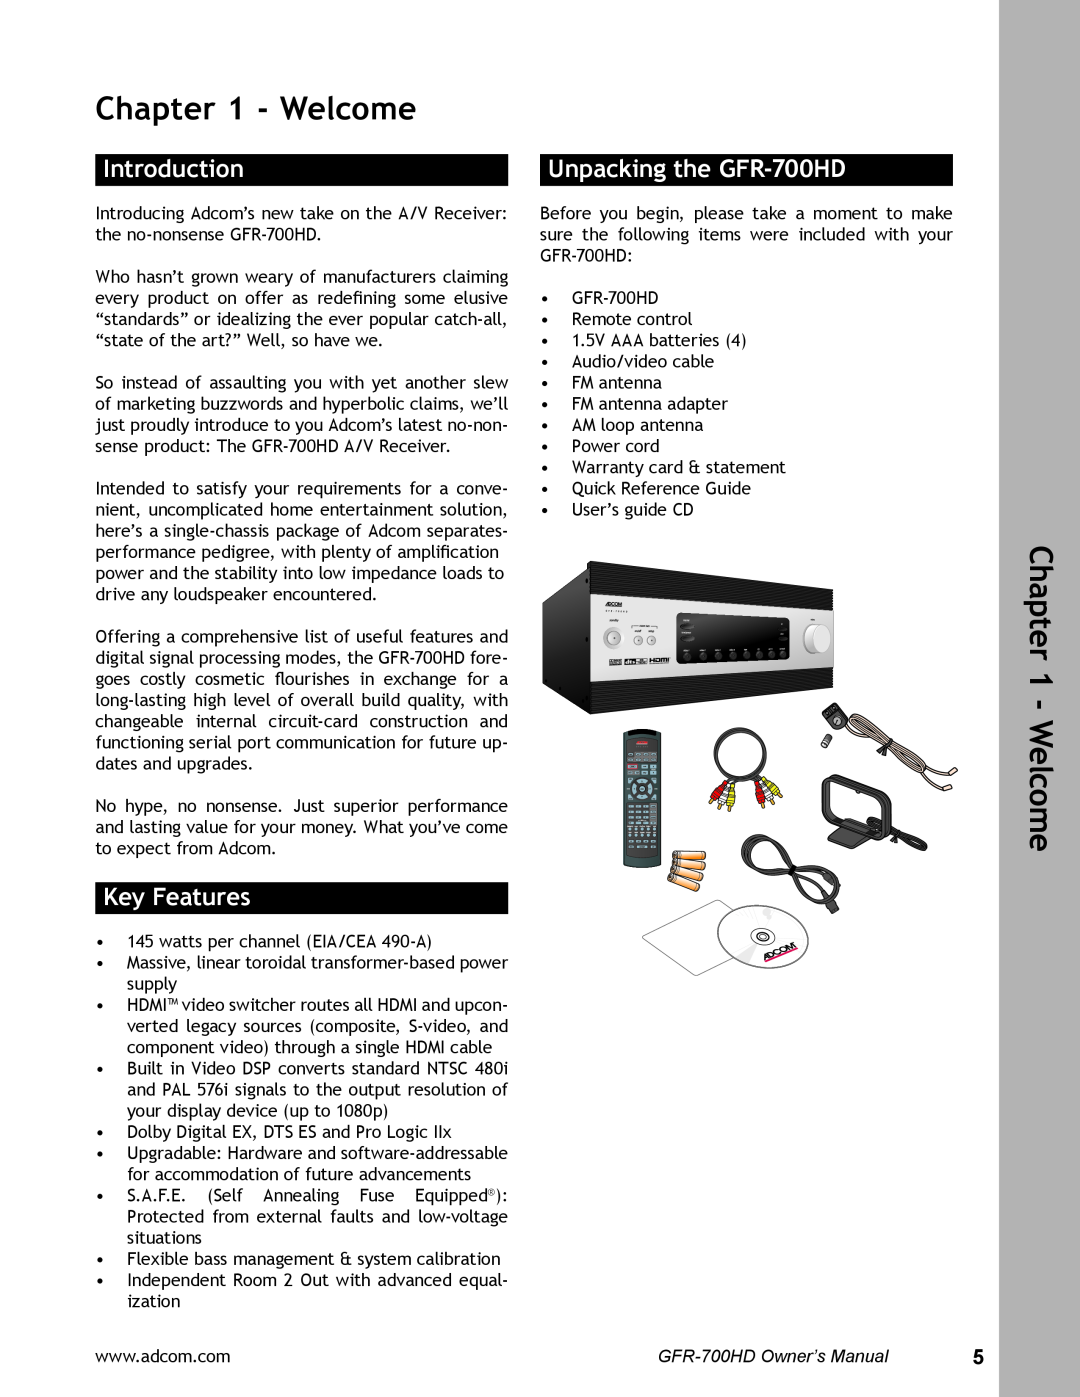 Adcom user manual Introduction, Key Features, Unpacking the GFR-700HD, Welcome 